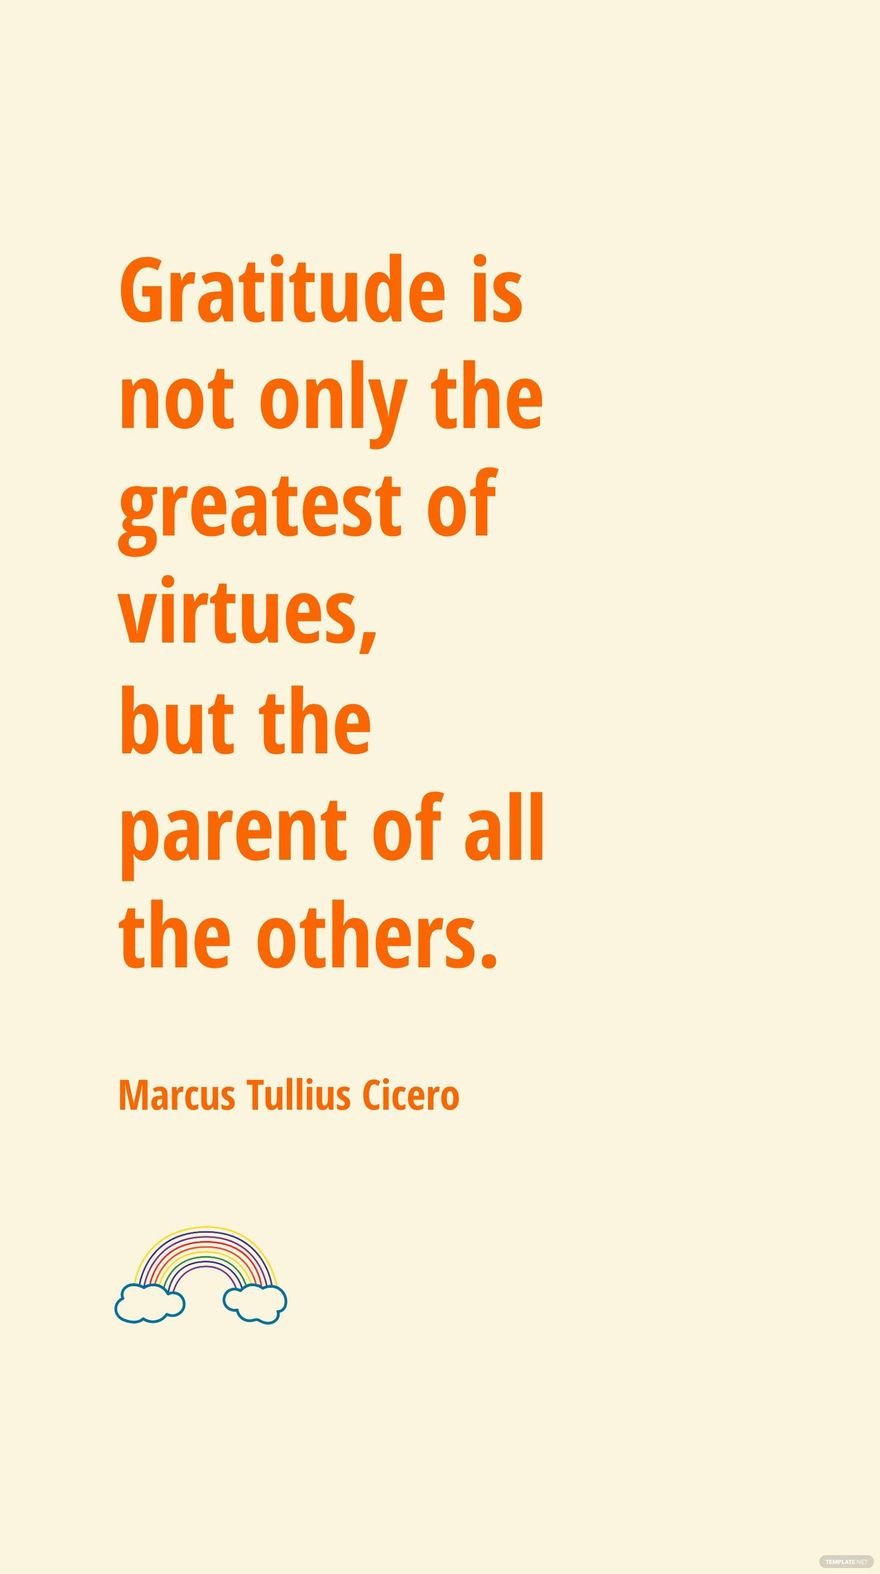 Marcus Tullius Cicero - Gratitude is not only the greatest of virtues, but the parent of all the others.